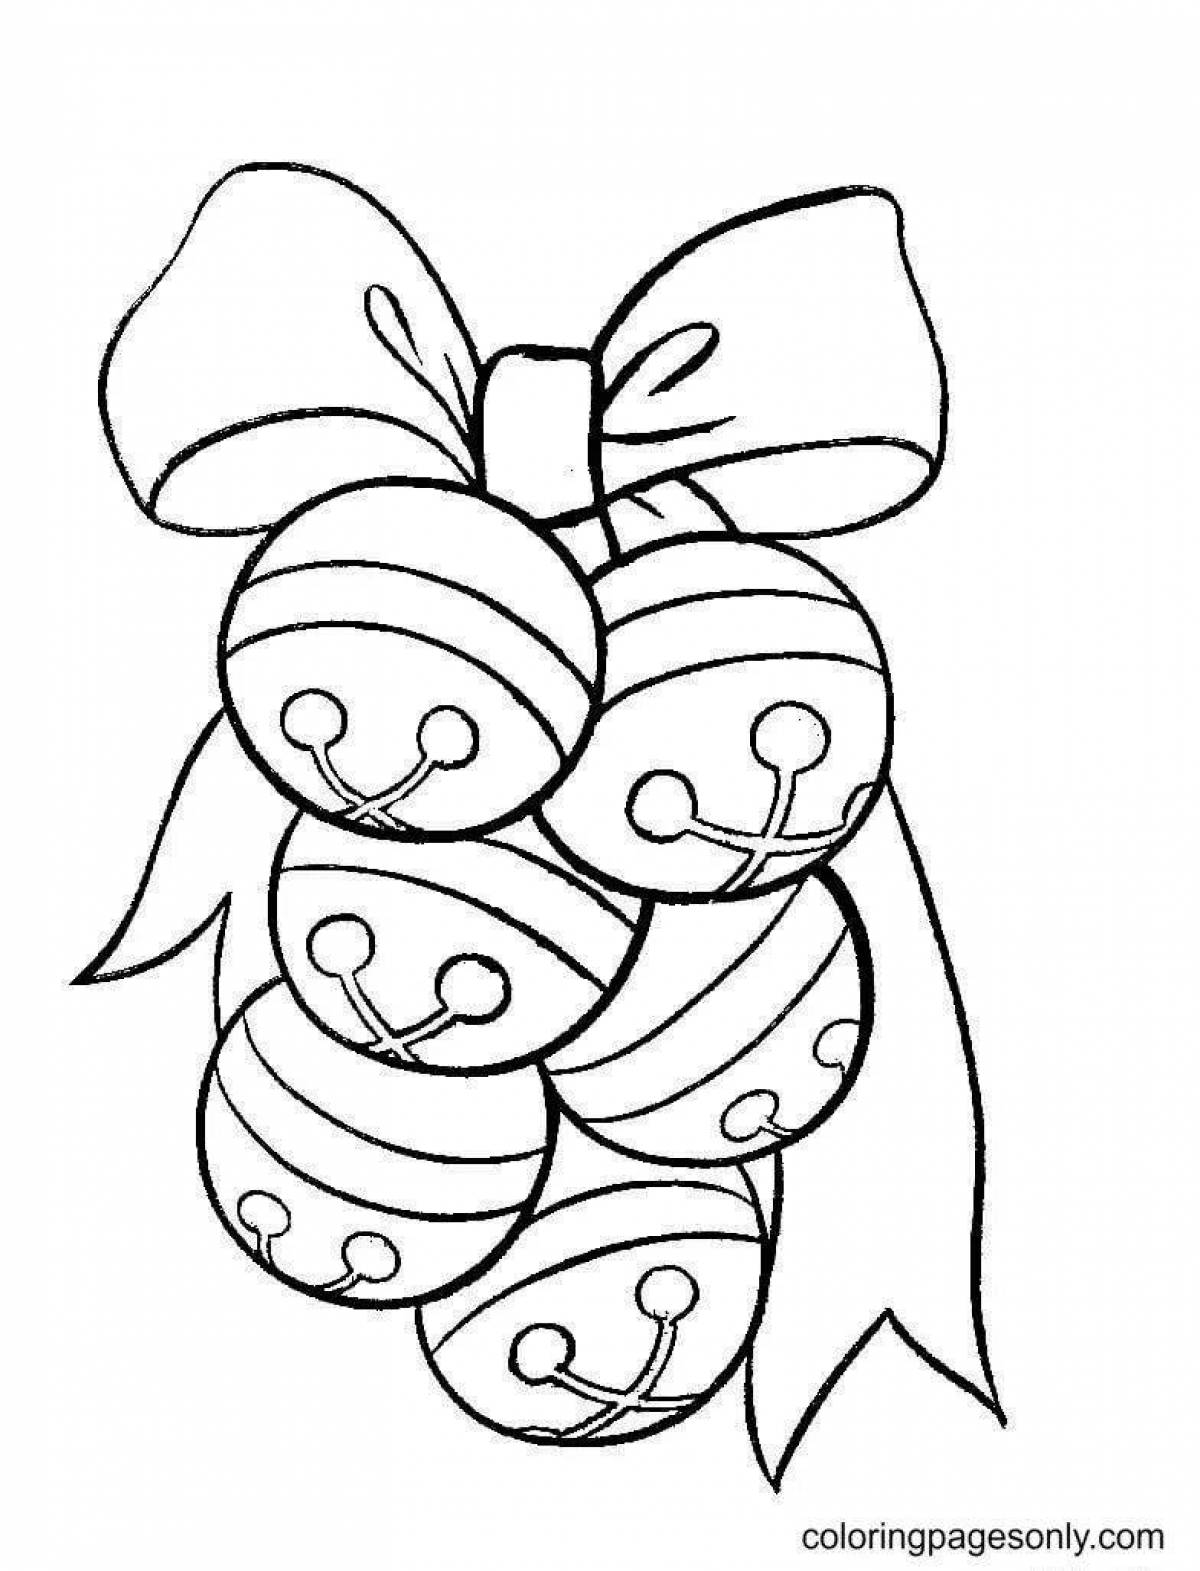 Amazing coloring pages for the little ones